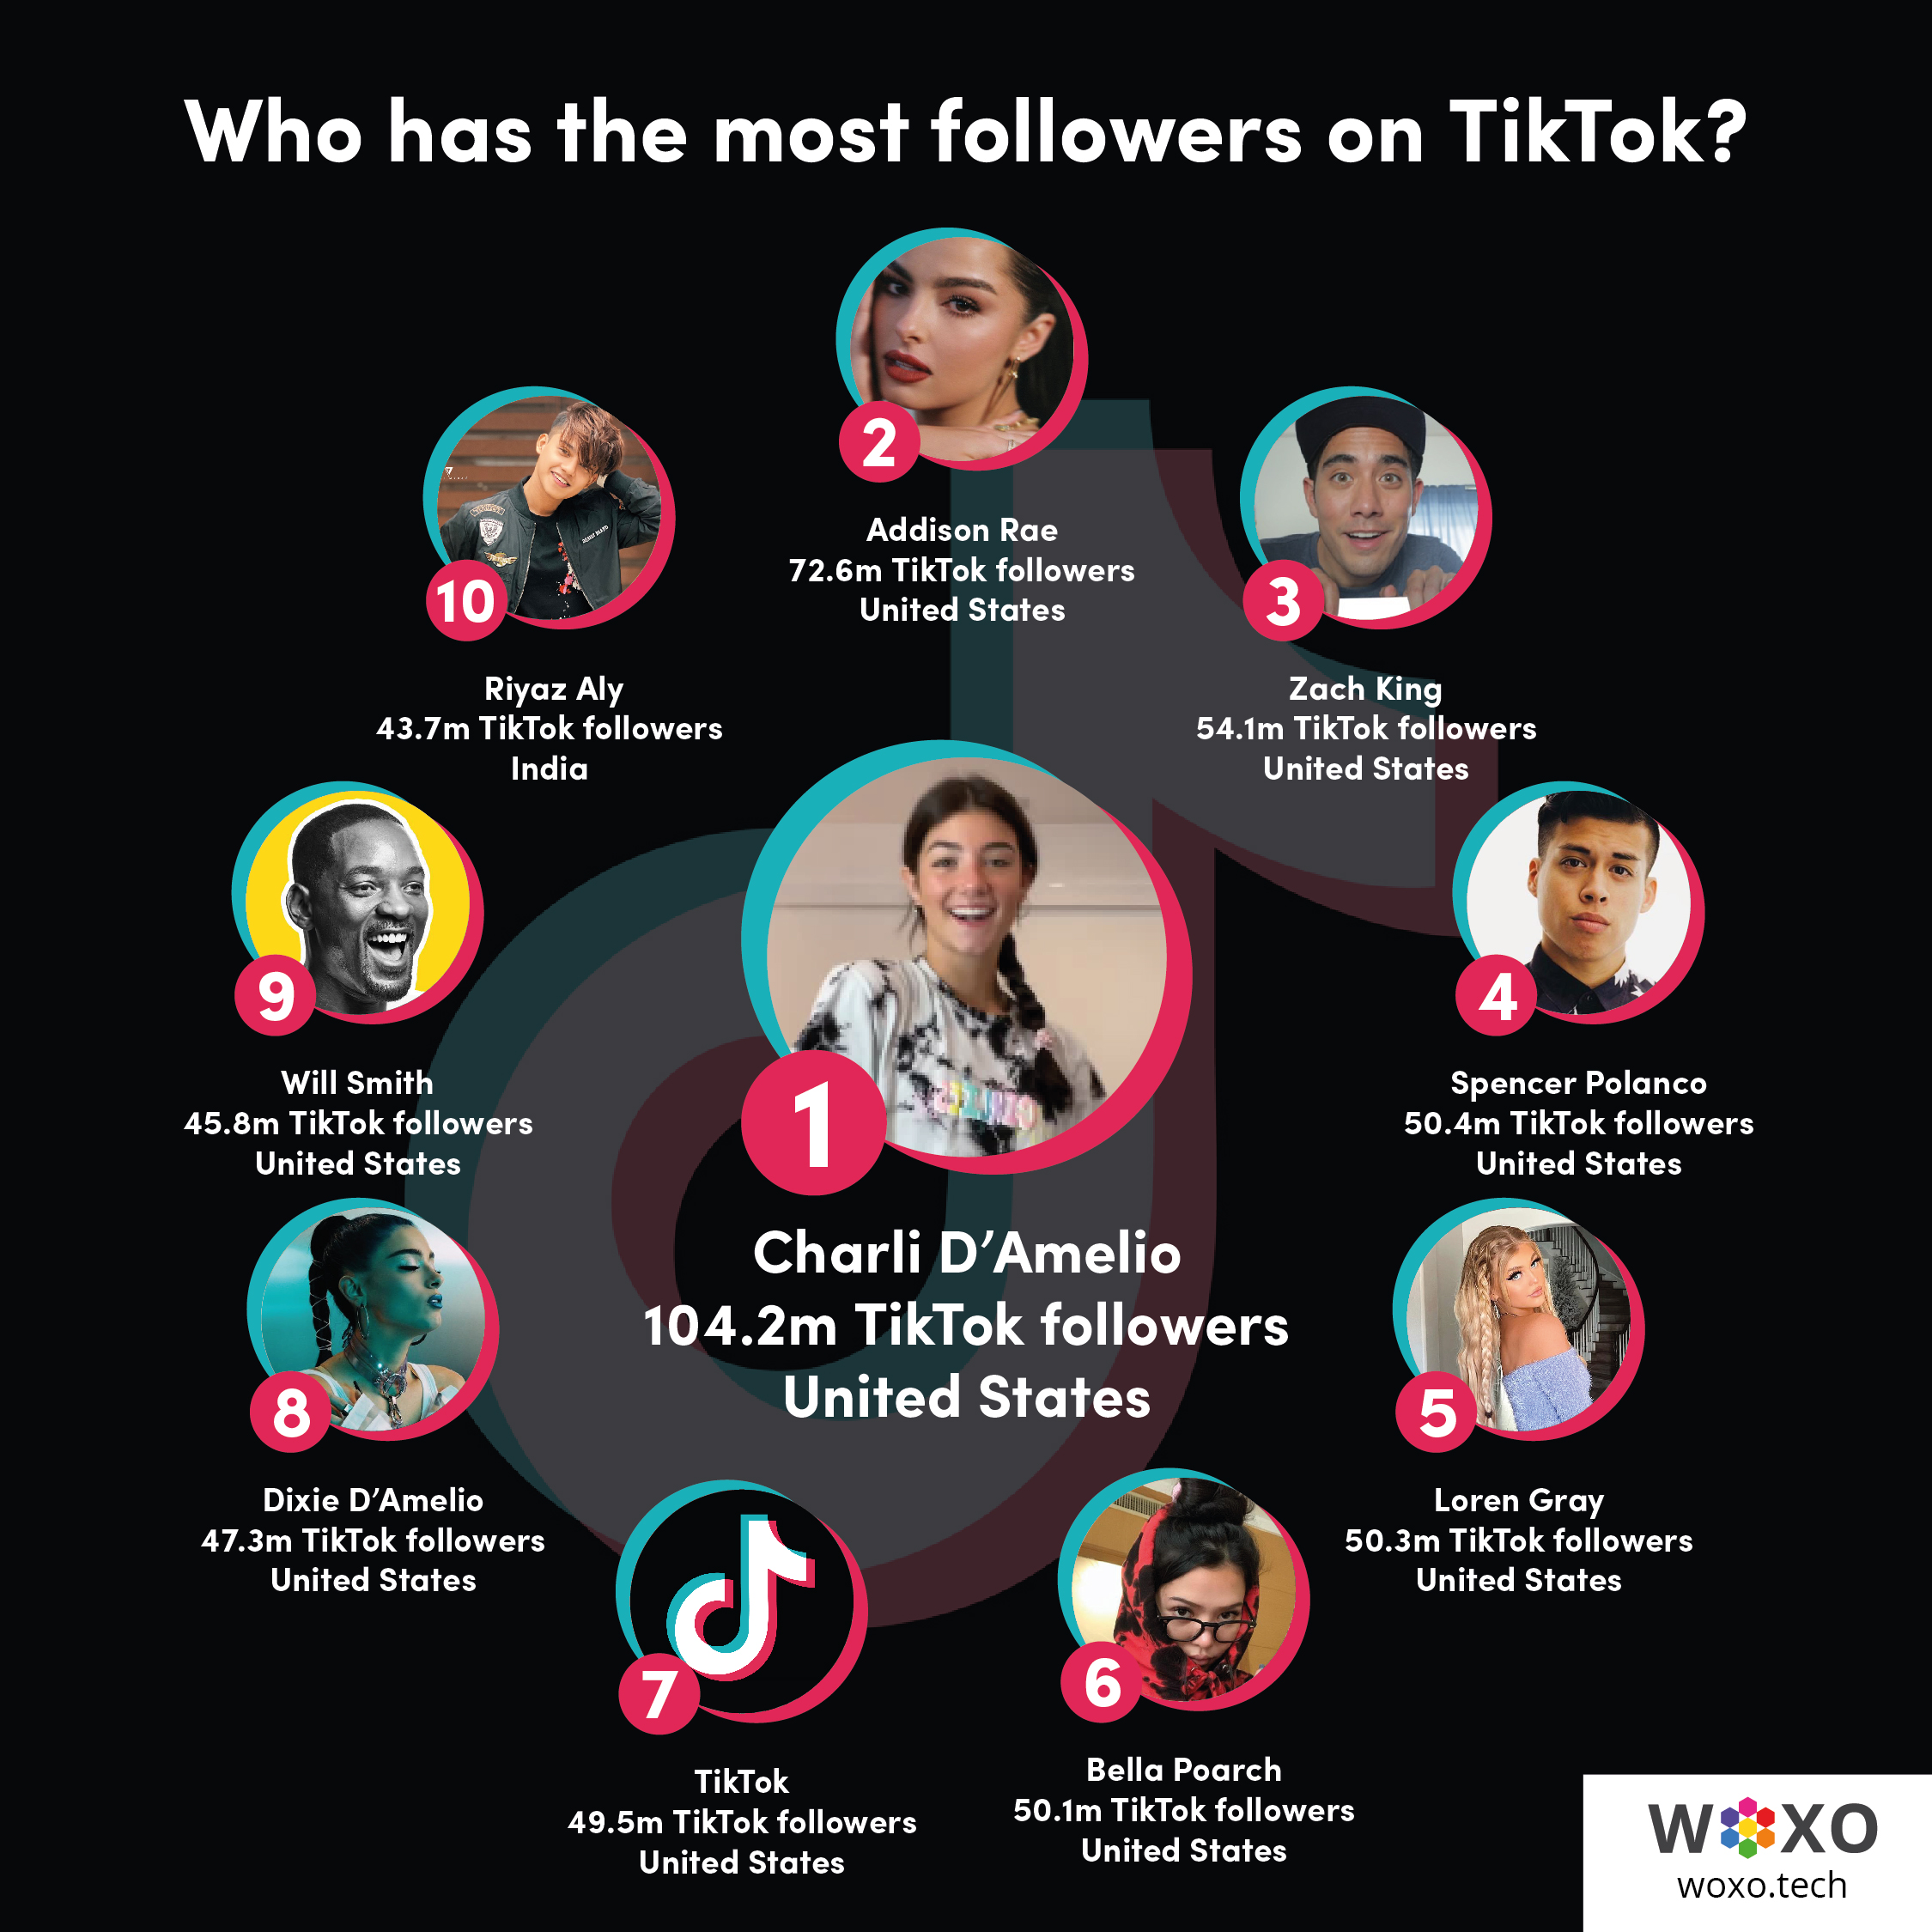 Who has the most followers on TikTok